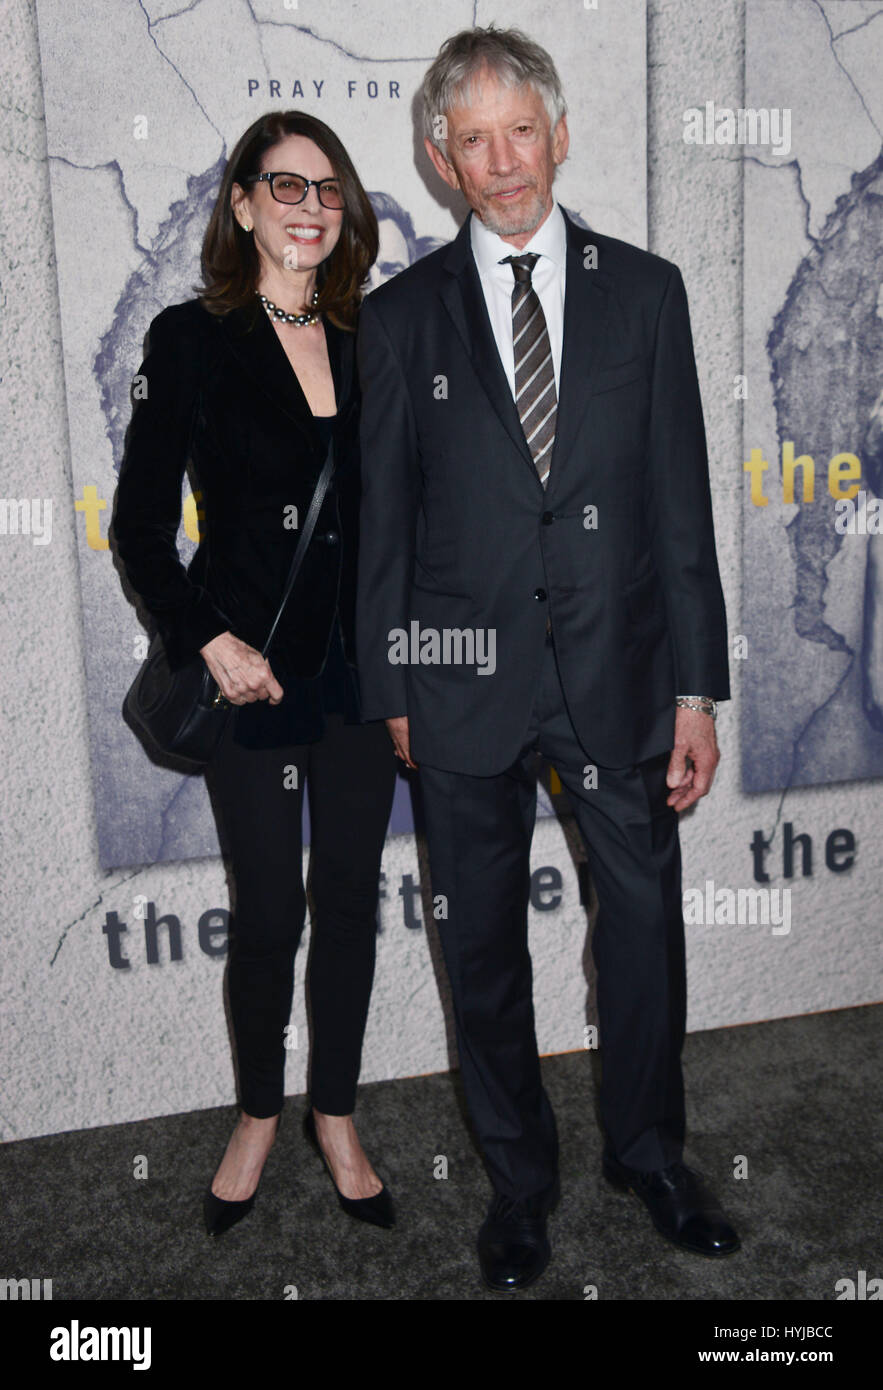 Los Angeles, USA. 04th Apr, 2017. Scott Glenn and wife 040 arriving at the Leftovers HBO premiere at the Avalon Club in Los Angeles. April 11, 2017. Credit: Tsuni/USA/Alamy Live News Stock Photo